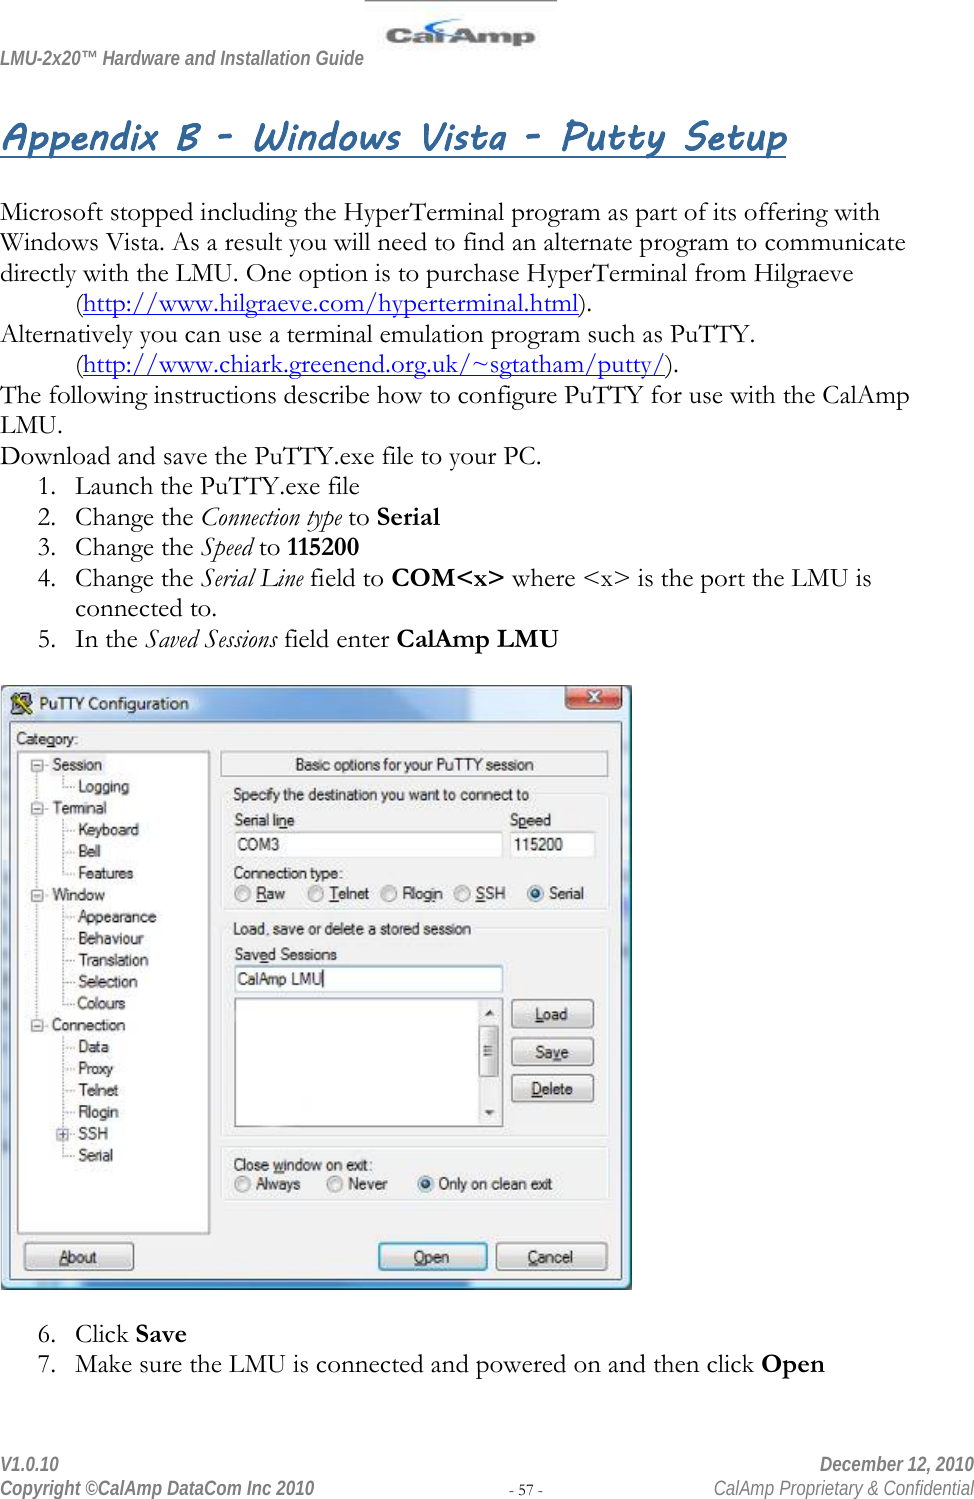 LMU-2x20™ Hardware and Installation Guide  V1.0.10    December 12, 2010 Copyright ©CalAmp DataCom Inc 2010 - 57 -  CalAmp Proprietary &amp; Confidential Appendix B - Windows Vista - Putty Setup  Microsoft stopped including the HyperTerminal program as part of its offering with Windows Vista. As a result you will need to find an alternate program to communicate directly with the LMU. One option is to purchase HyperTerminal from Hilgraeve  (http://www.hilgraeve.com/hyperterminal.html).  Alternatively you can use a terminal emulation program such as PuTTY.  (http://www.chiark.greenend.org.uk/~sgtatham/putty/).  The following instructions describe how to configure PuTTY for use with the CalAmp LMU. Download and save the PuTTY.exe file to your PC. 1. Launch the PuTTY.exe file 2. Change the Connection type to Serial 3. Change the Speed to 115200 4. Change the Serial Line field to COM&lt;x&gt; where &lt;x&gt; is the port the LMU is connected to. 5. In the Saved Sessions field enter CalAmp LMU    6. Click Save 7. Make sure the LMU is connected and powered on and then click Open 